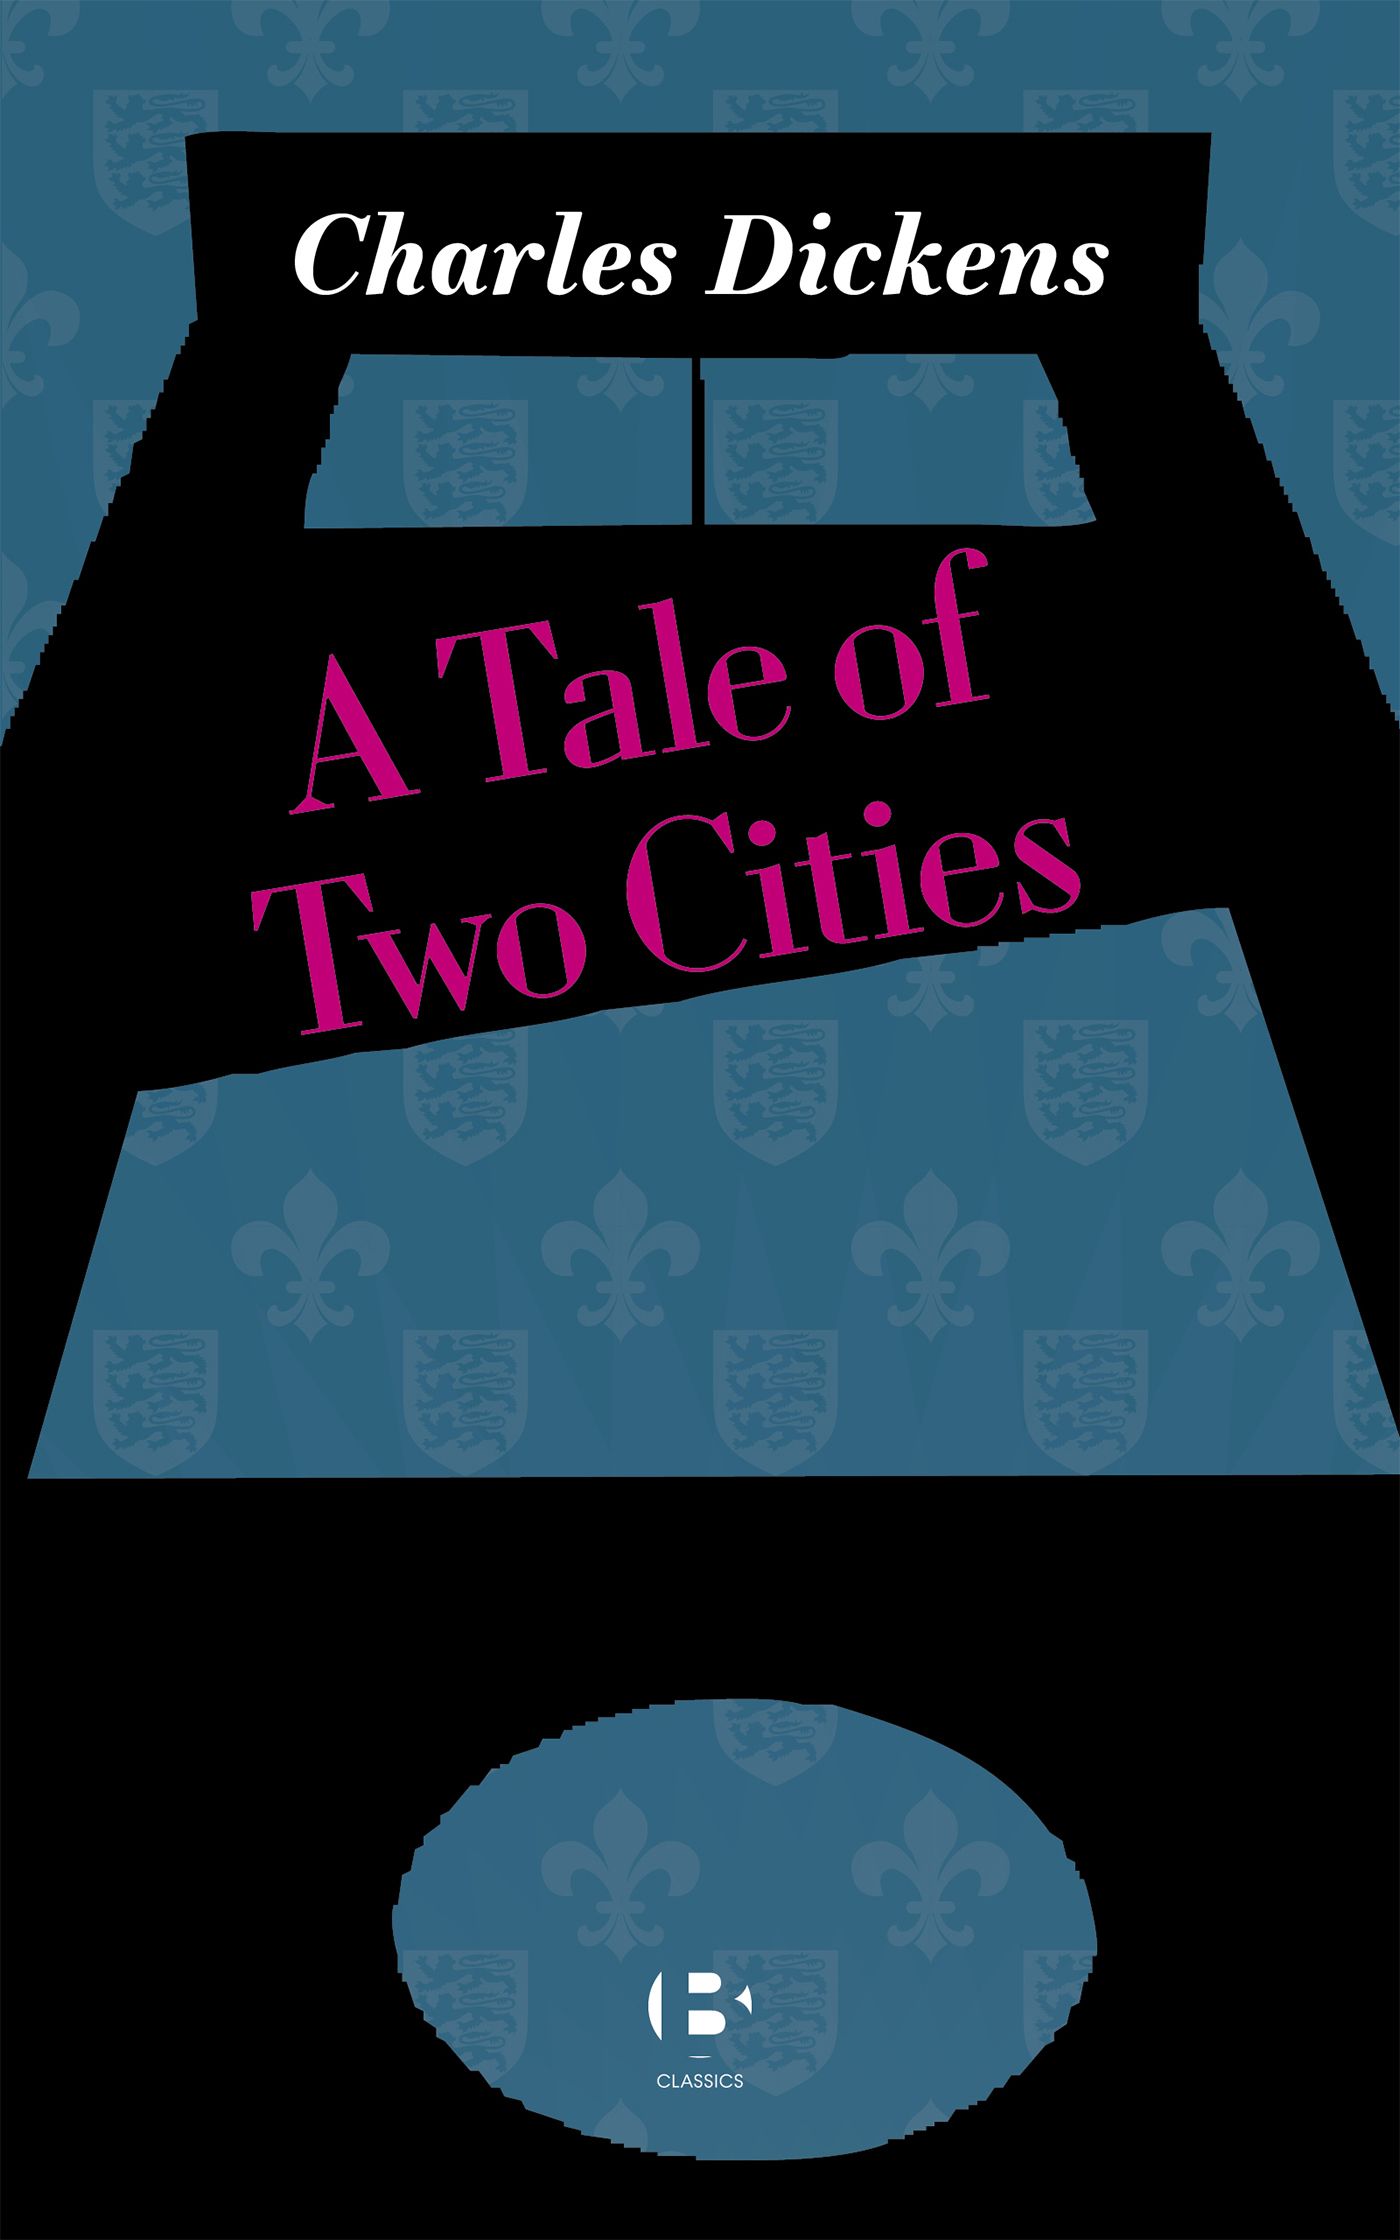 A Tale of Two Cities, eBook by Charles Dickens